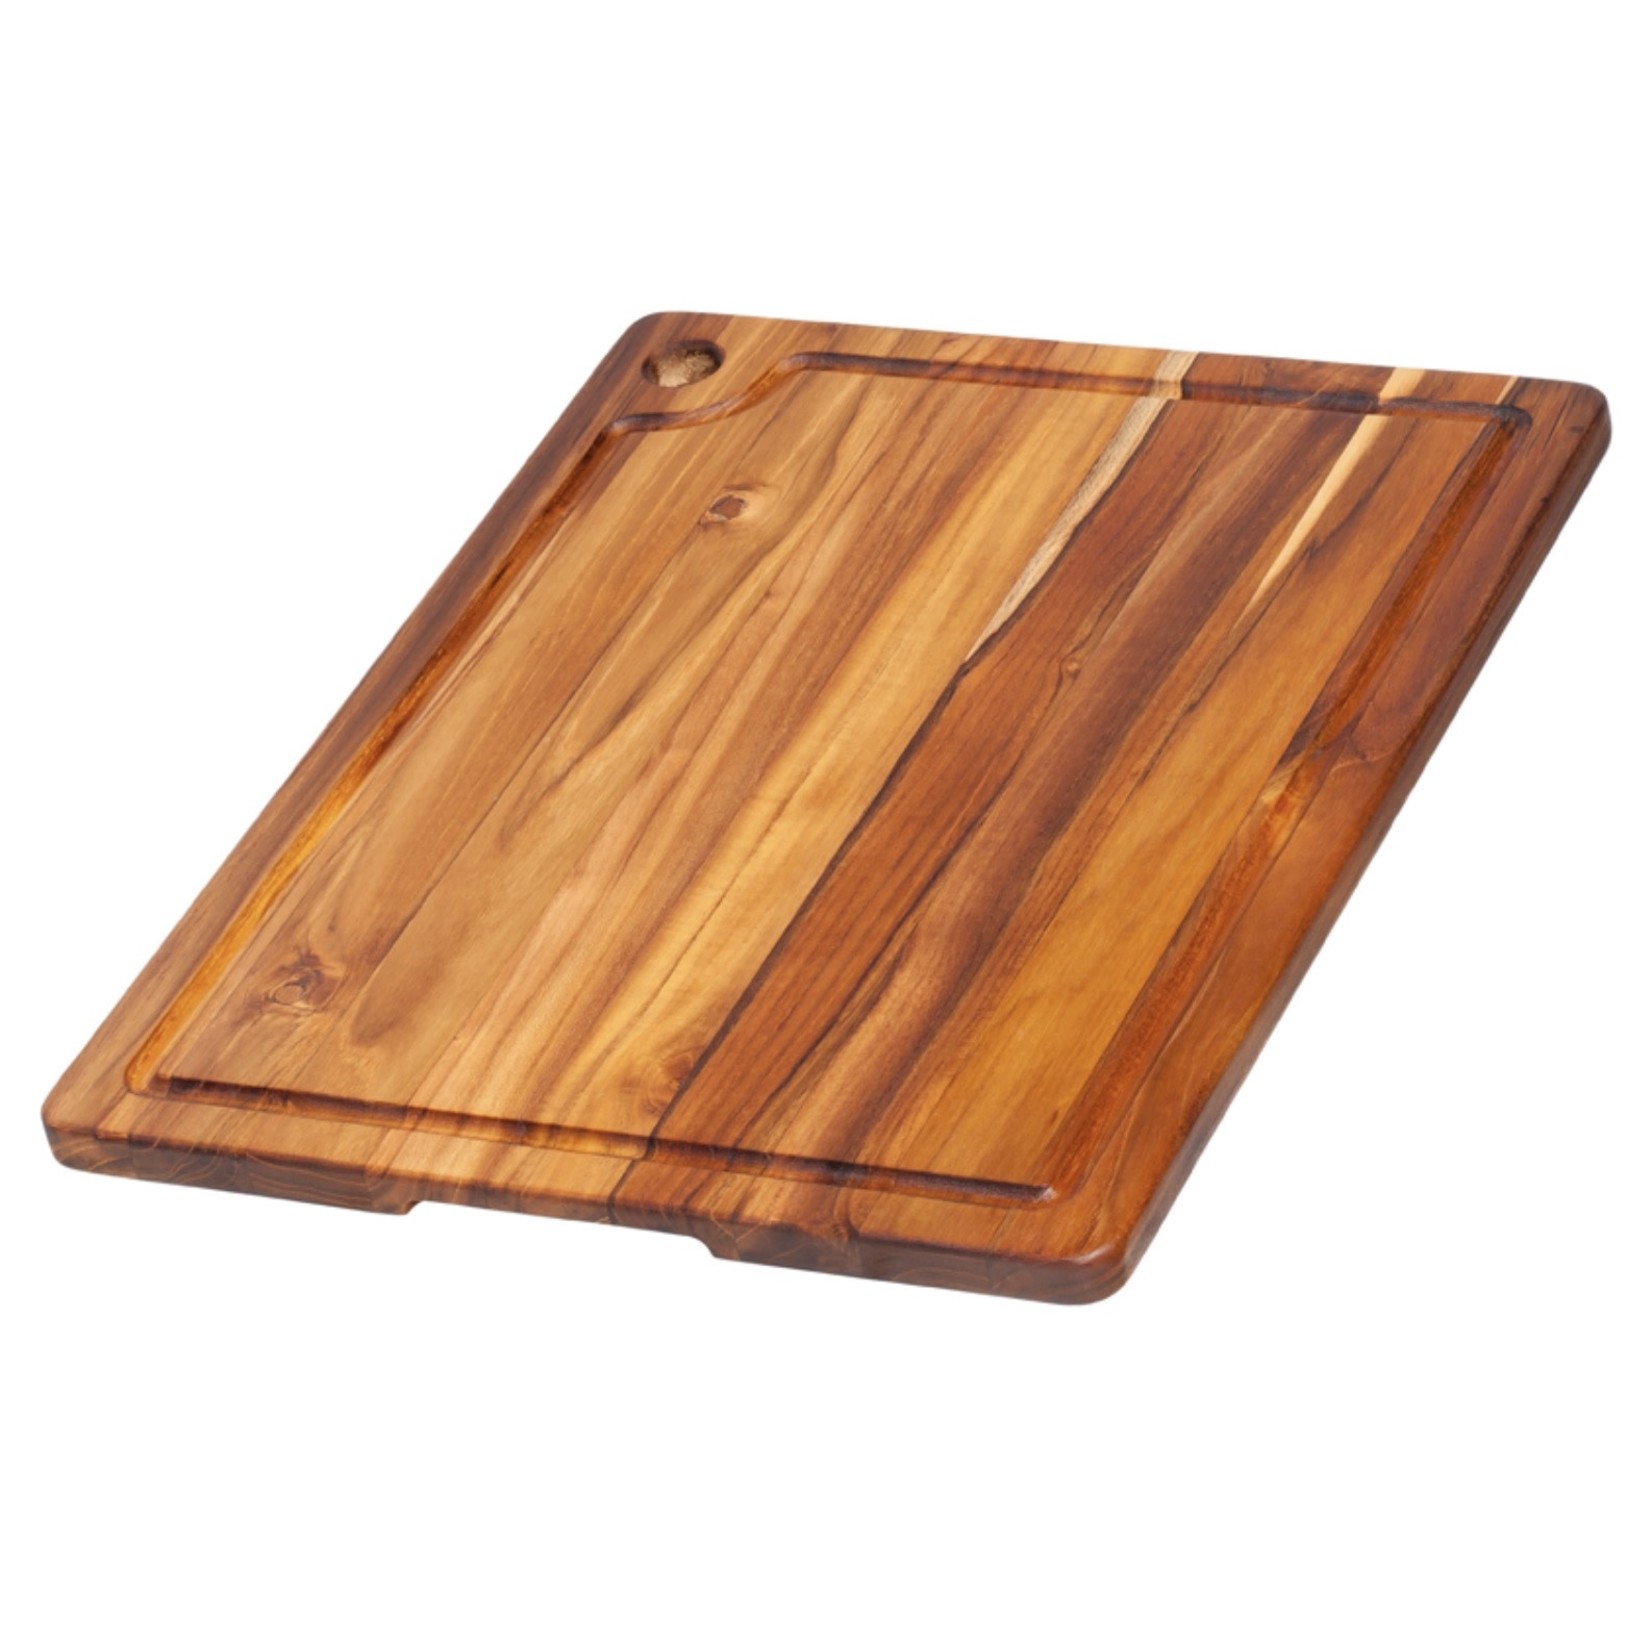 TEAKHAUS TEAKHAUS Corner Hole Cutting Board with Juice Groove 18x14.75"